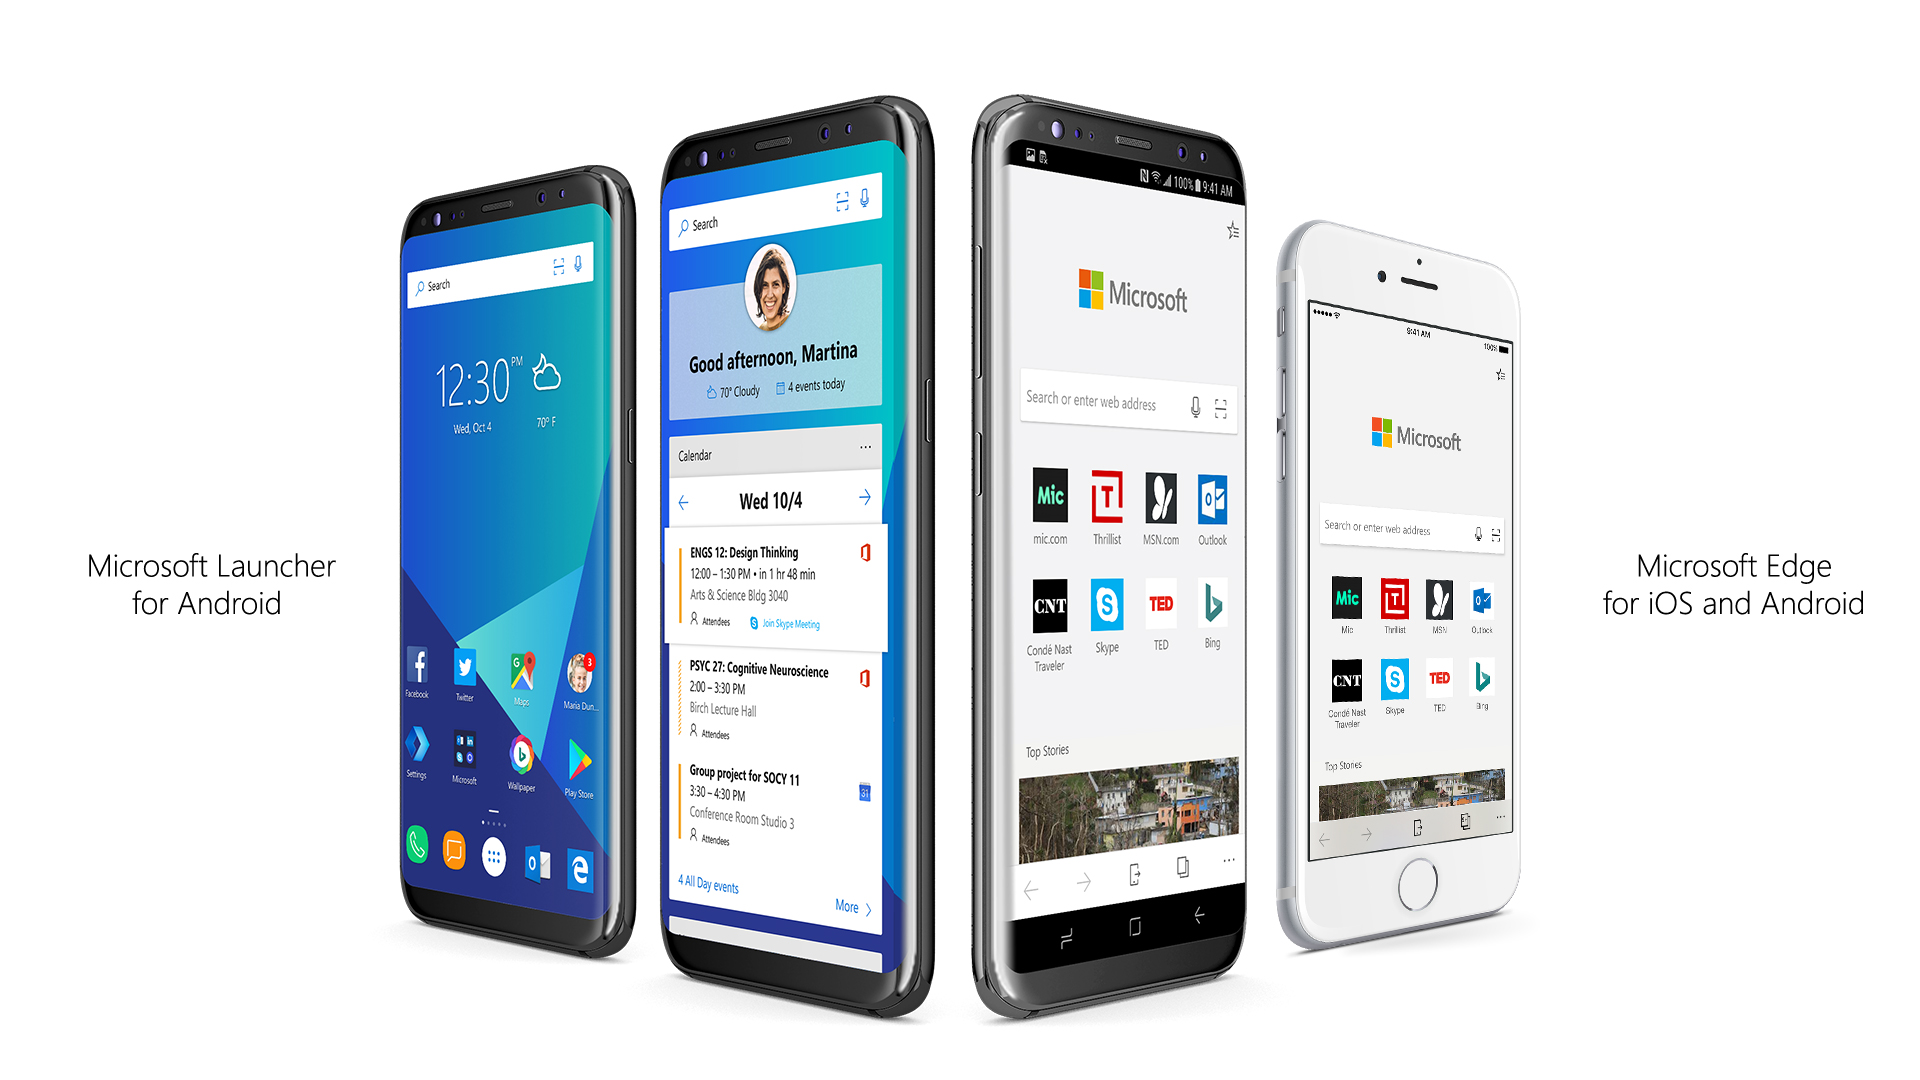 New Microsoft Launcher Beta 5.2 version for Android - January 21 caaf609f6273fcc3e9545708498dcded.jpg